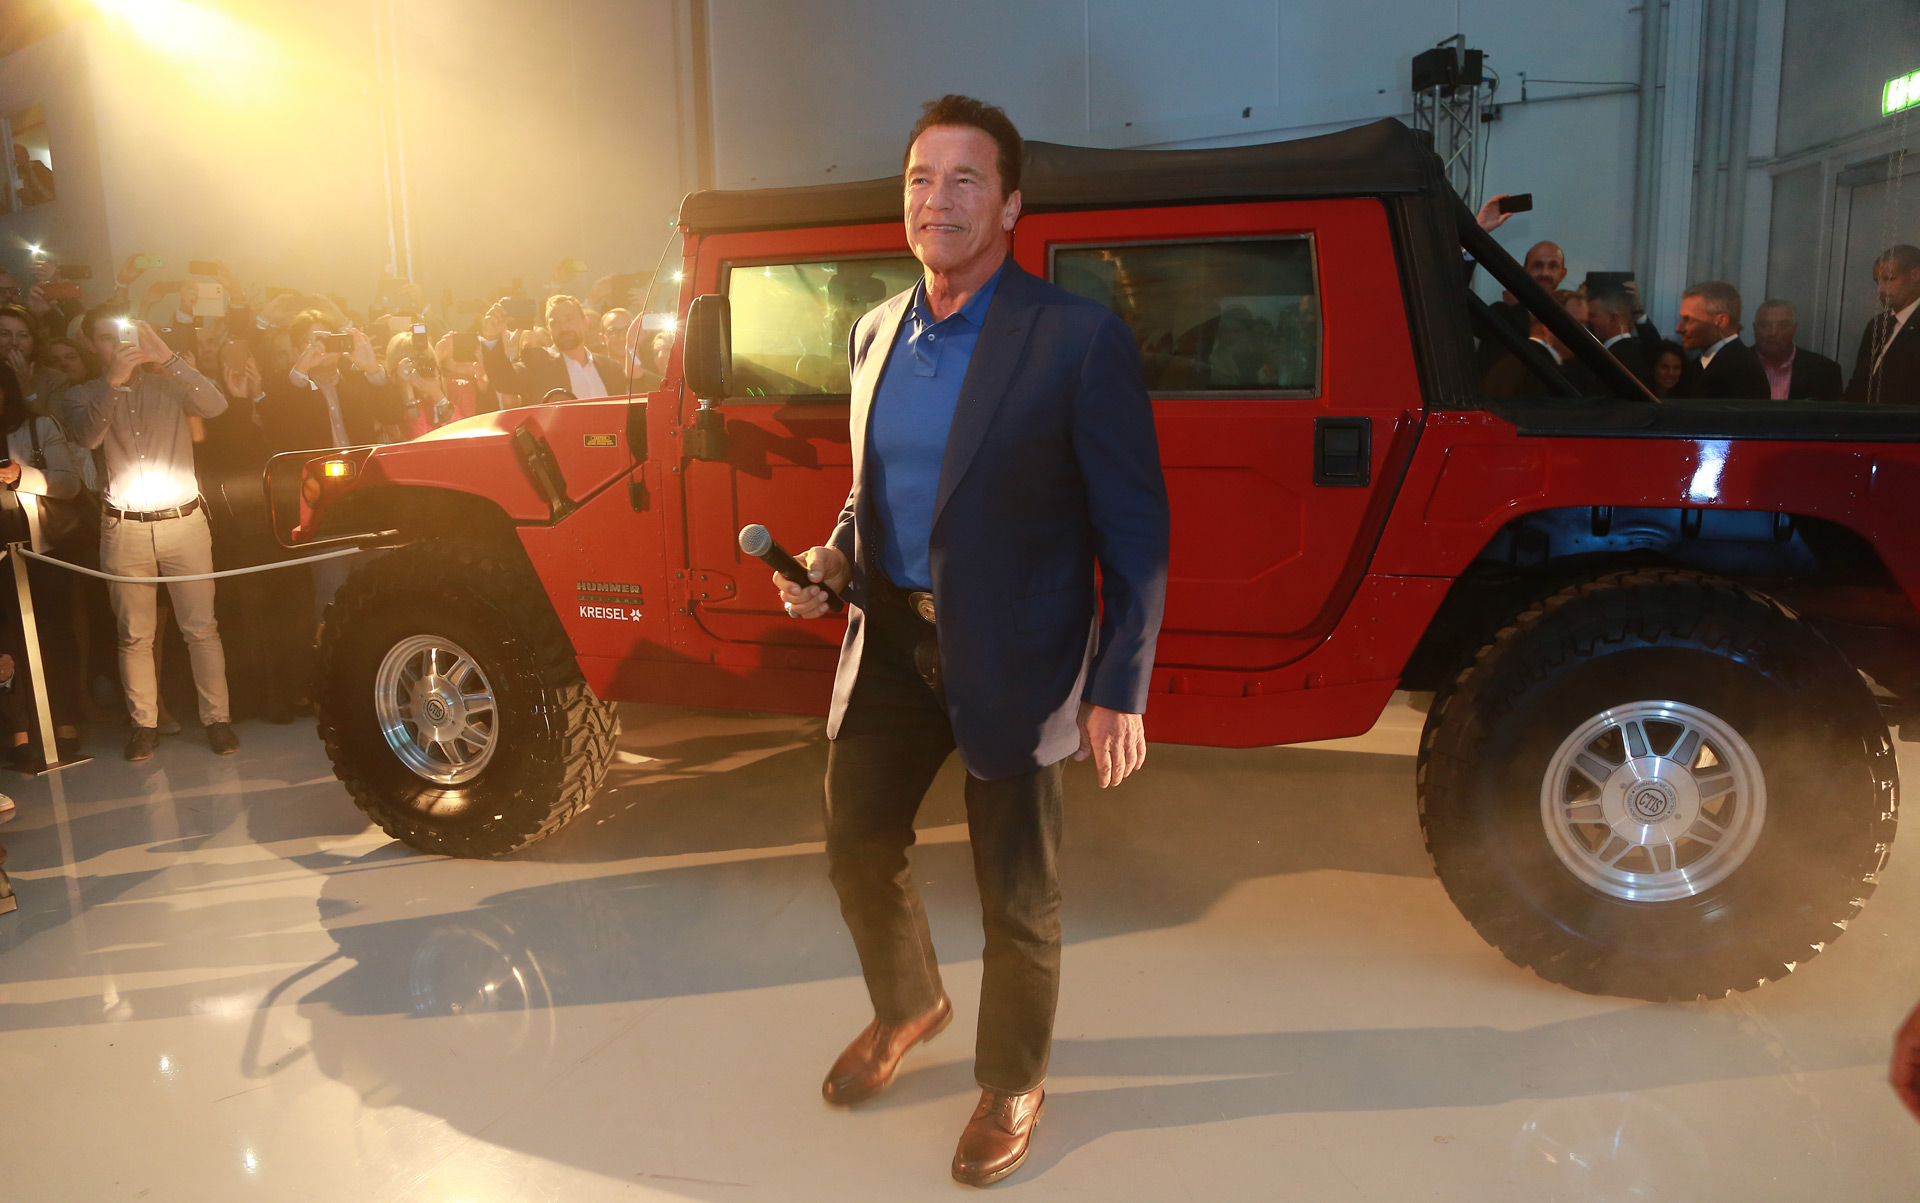 Schwarzenegger is “kicking gas” and taking names in EVadvocacy short